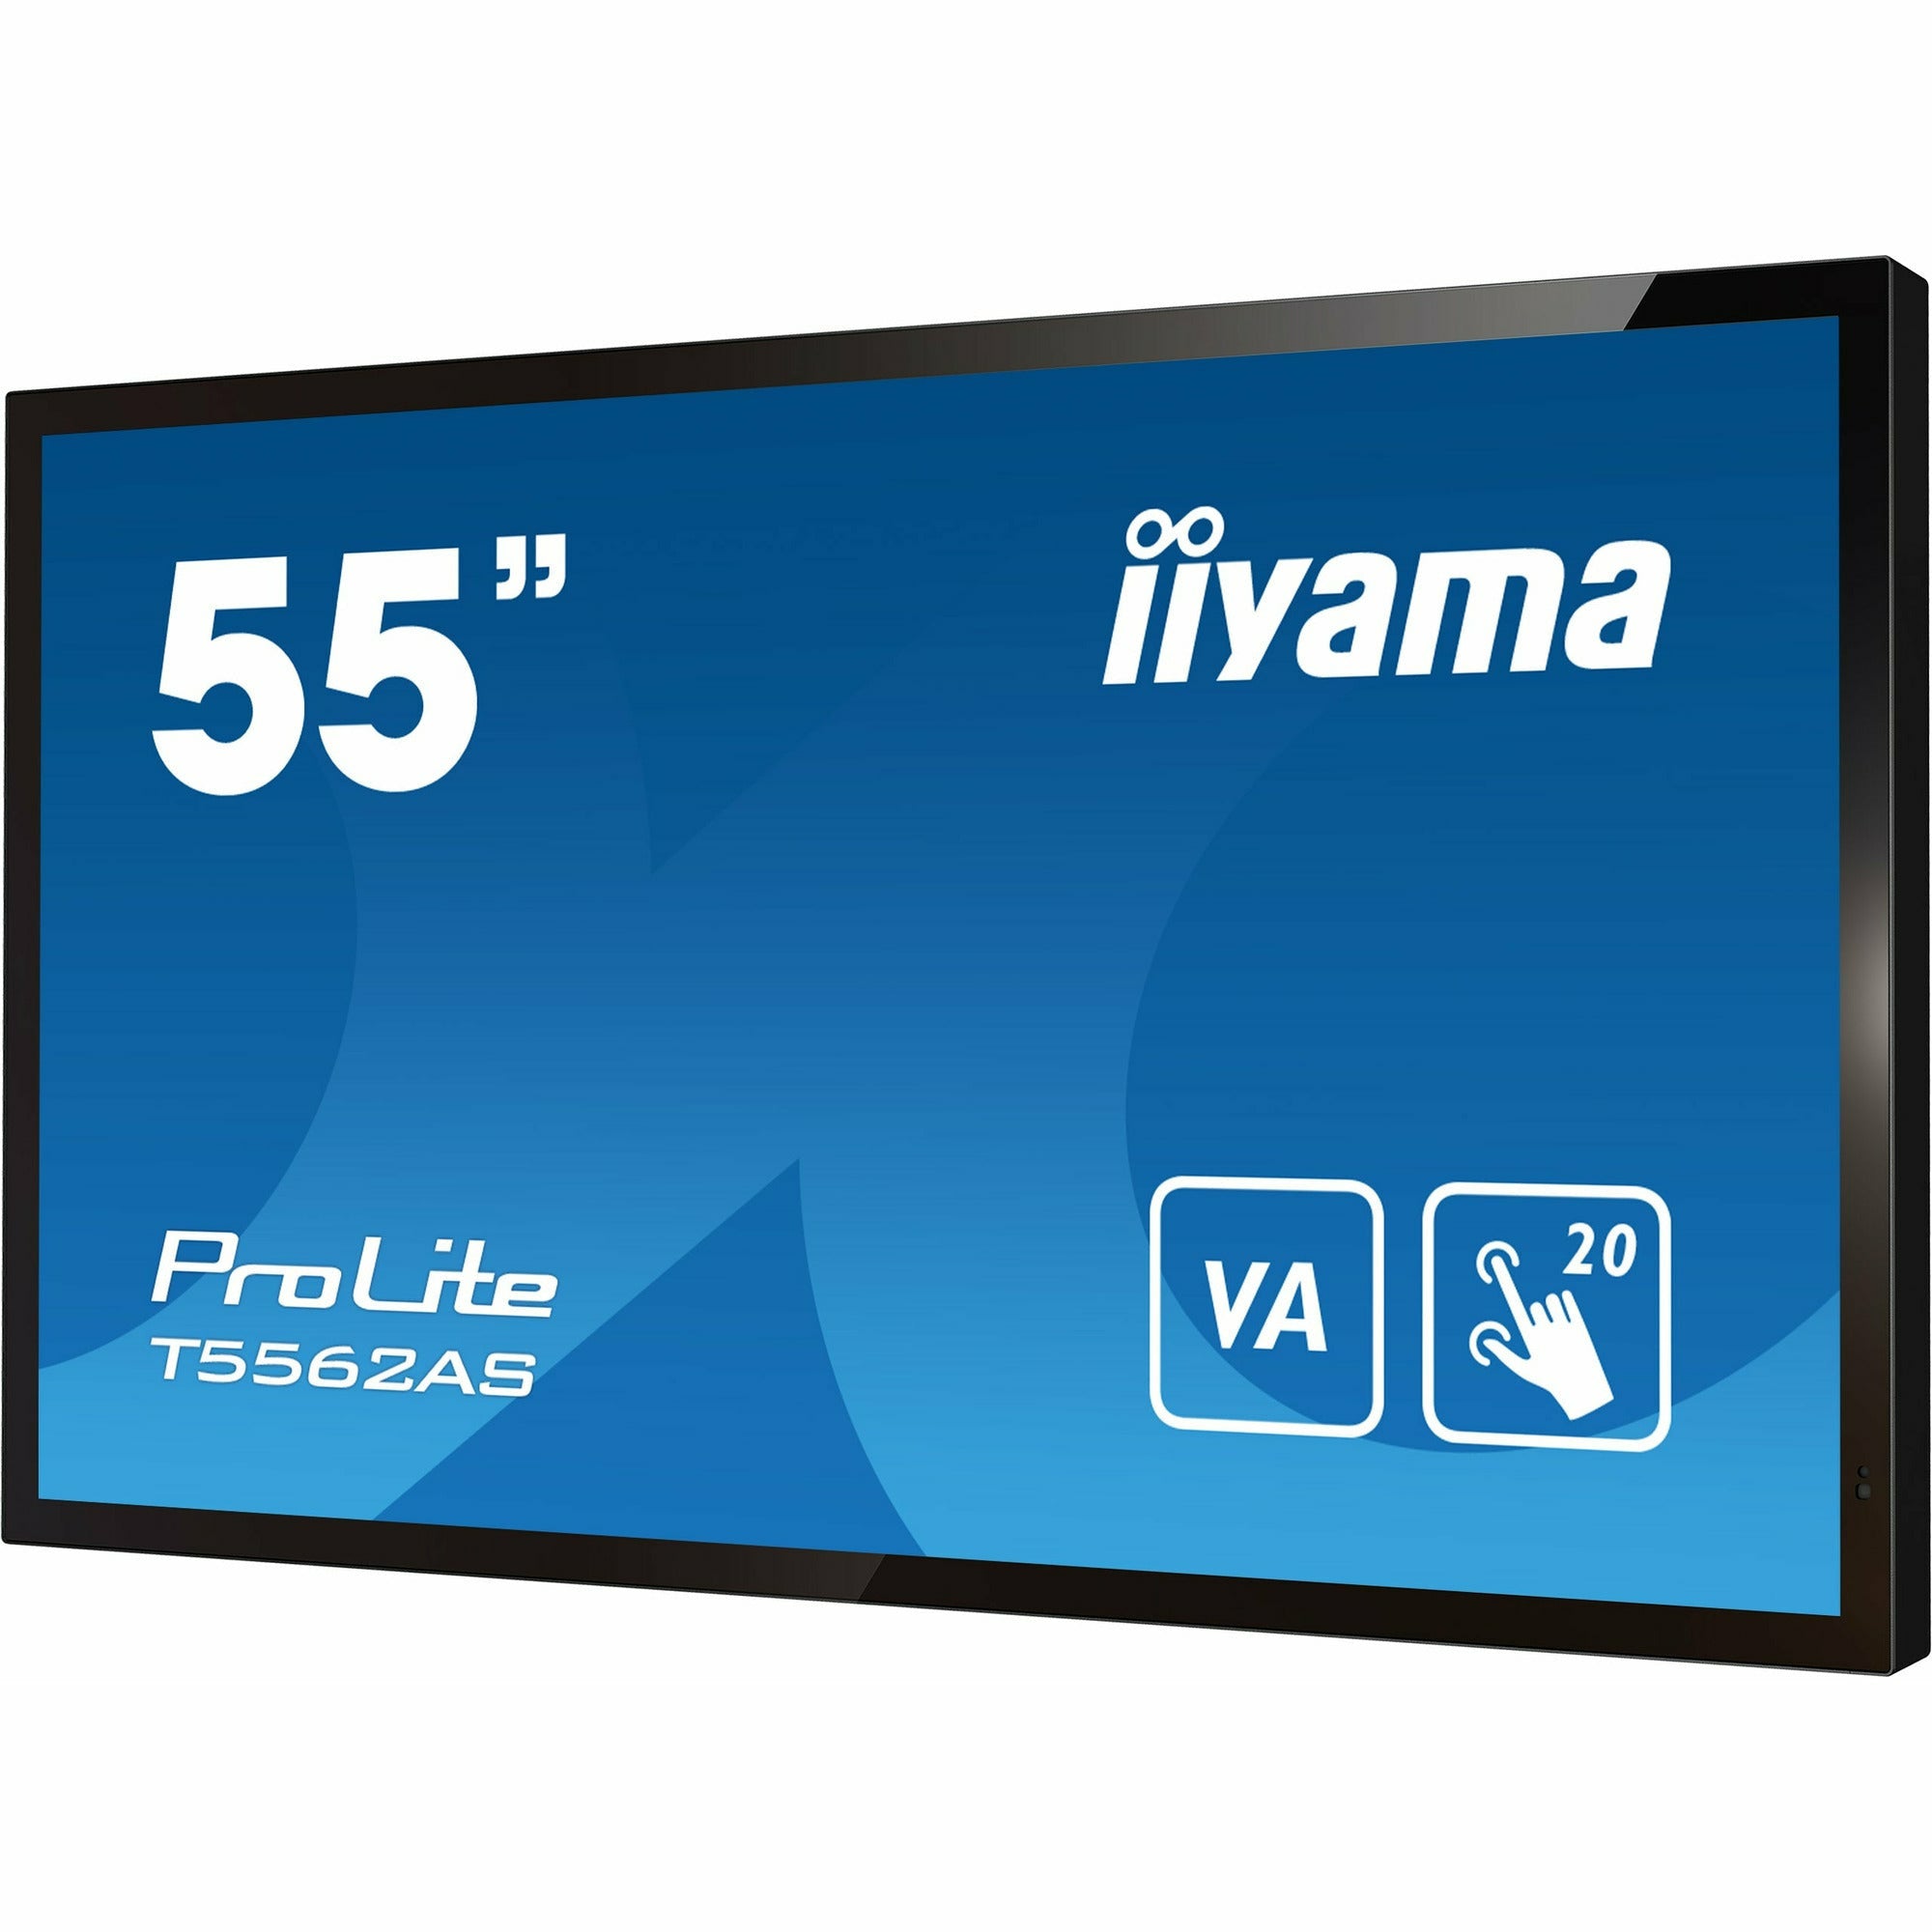 Iiyama T5562AS-B1 55" VA 4K UHD Projective Capacitive 20pt Touchscreen with Palm Rejection Edge to Edge Glass Design